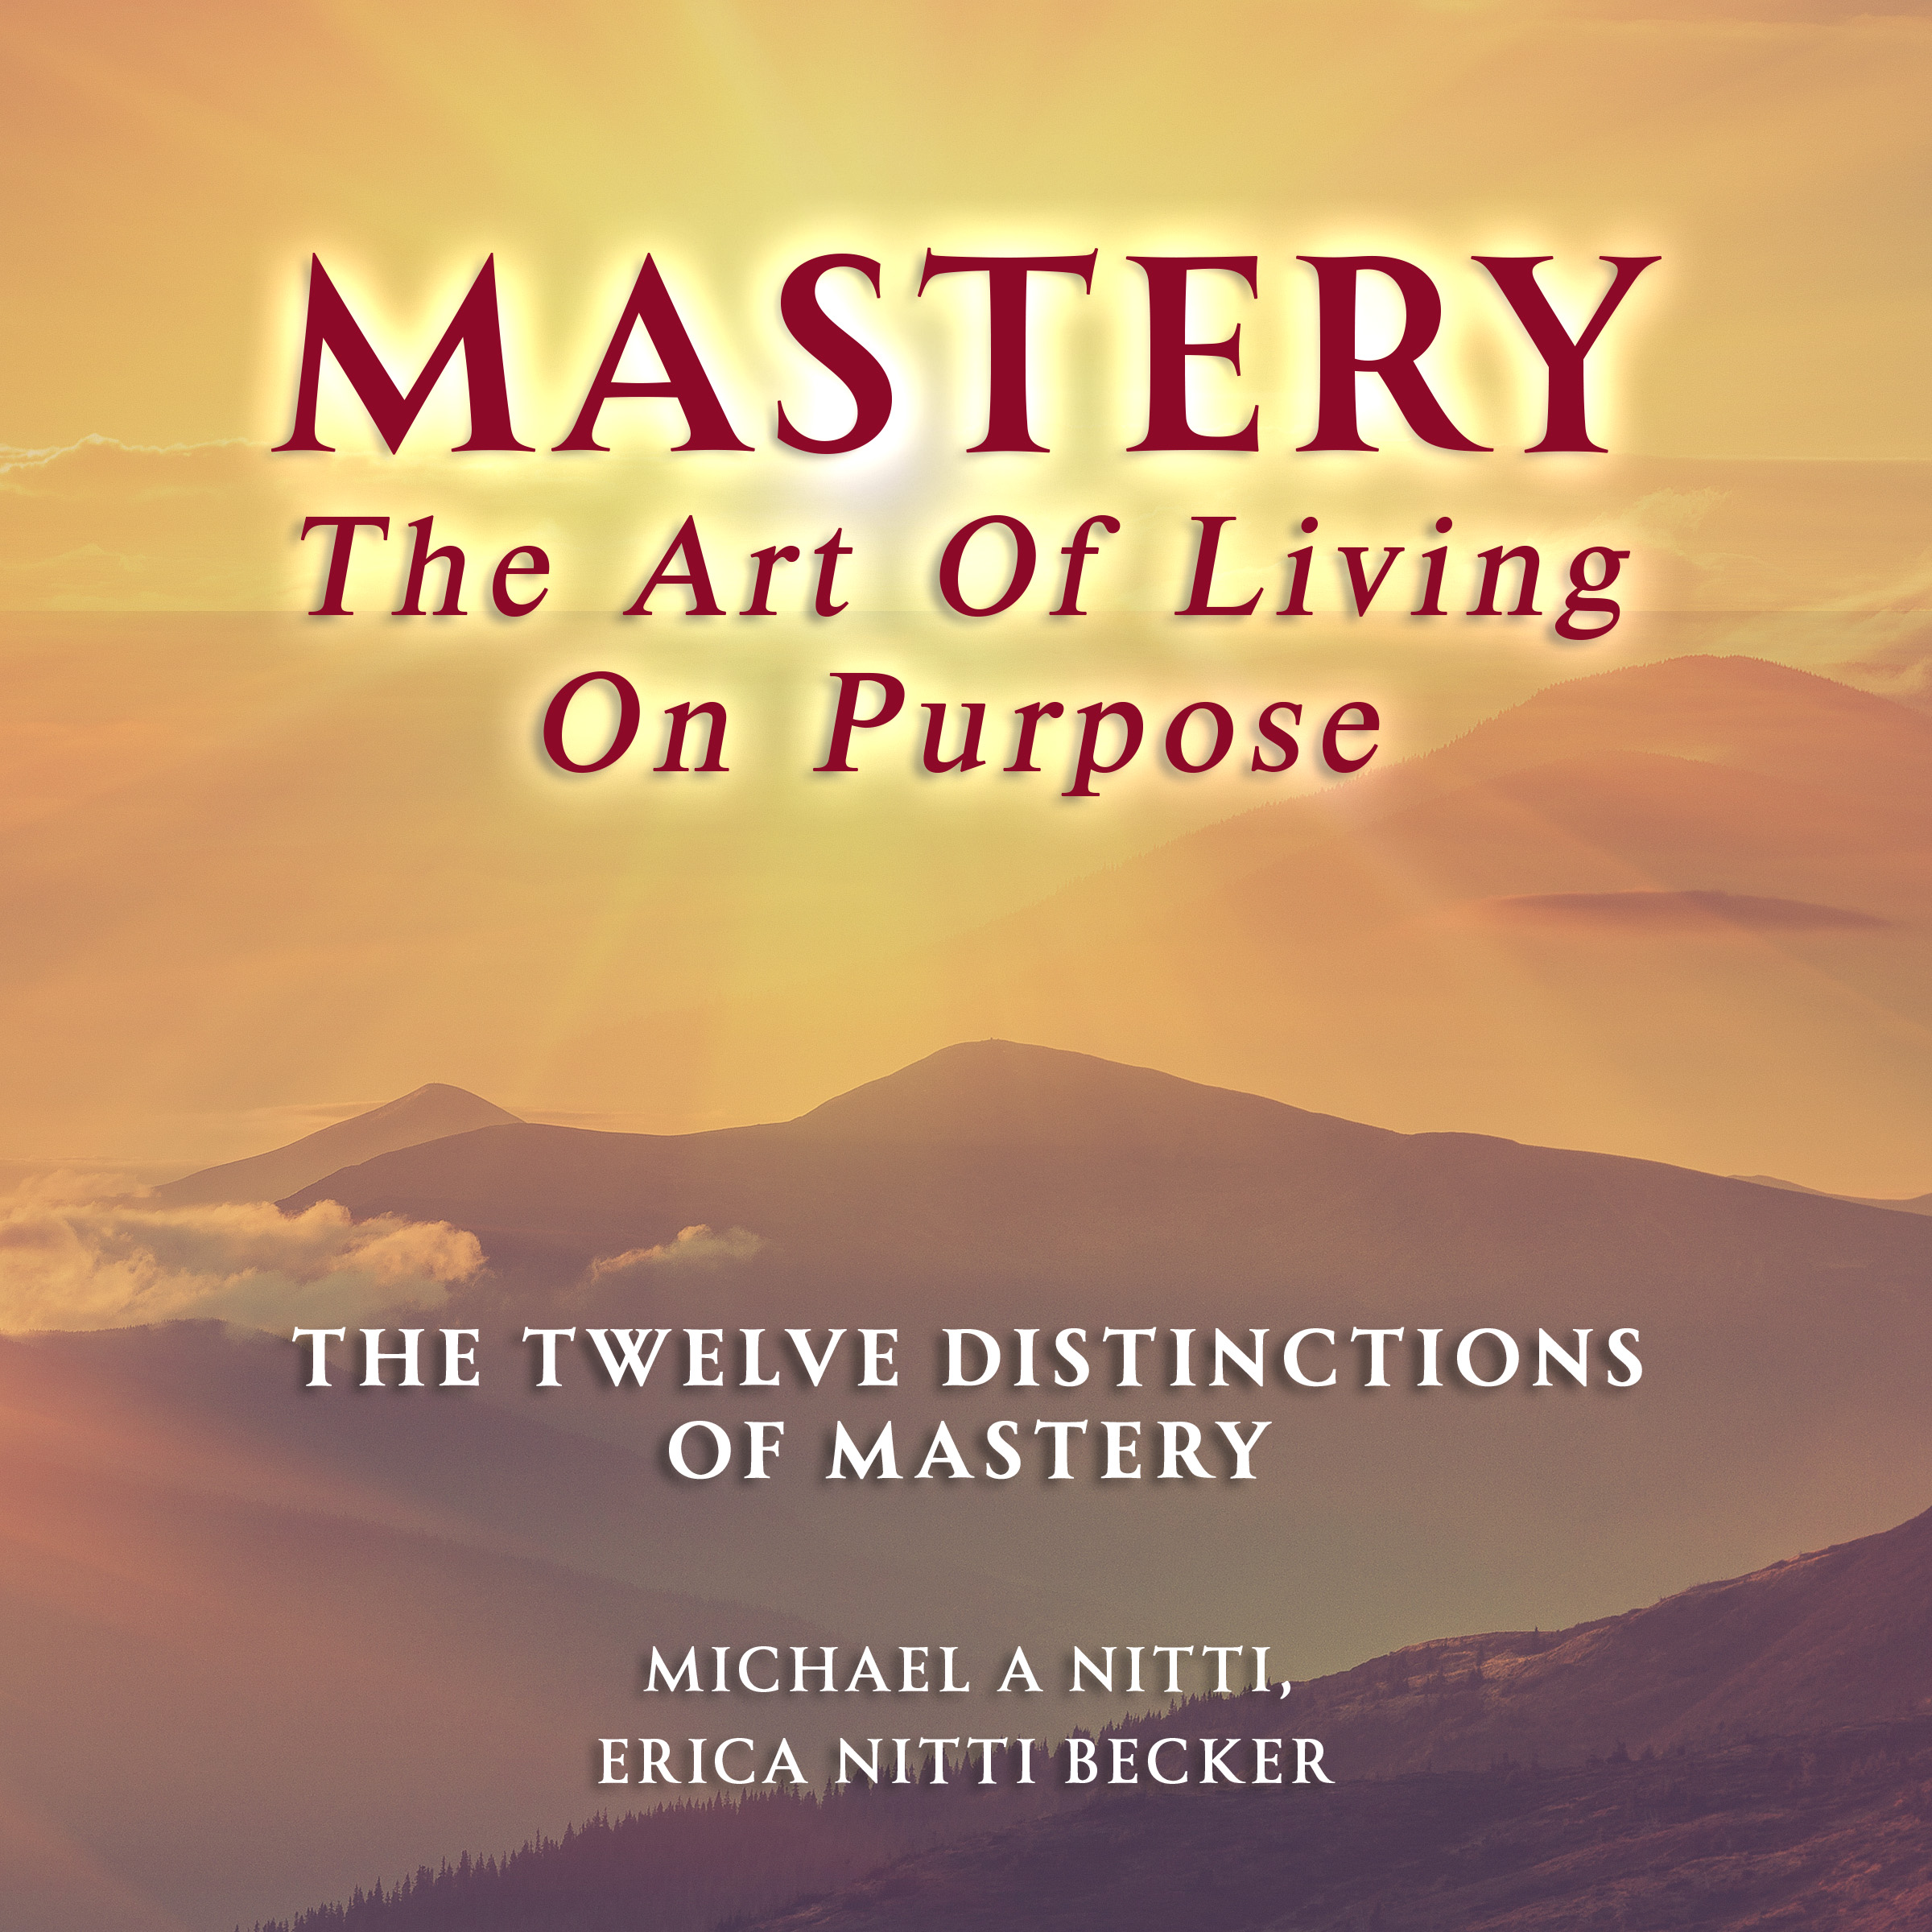 Mastery The Art of Living on Purpose